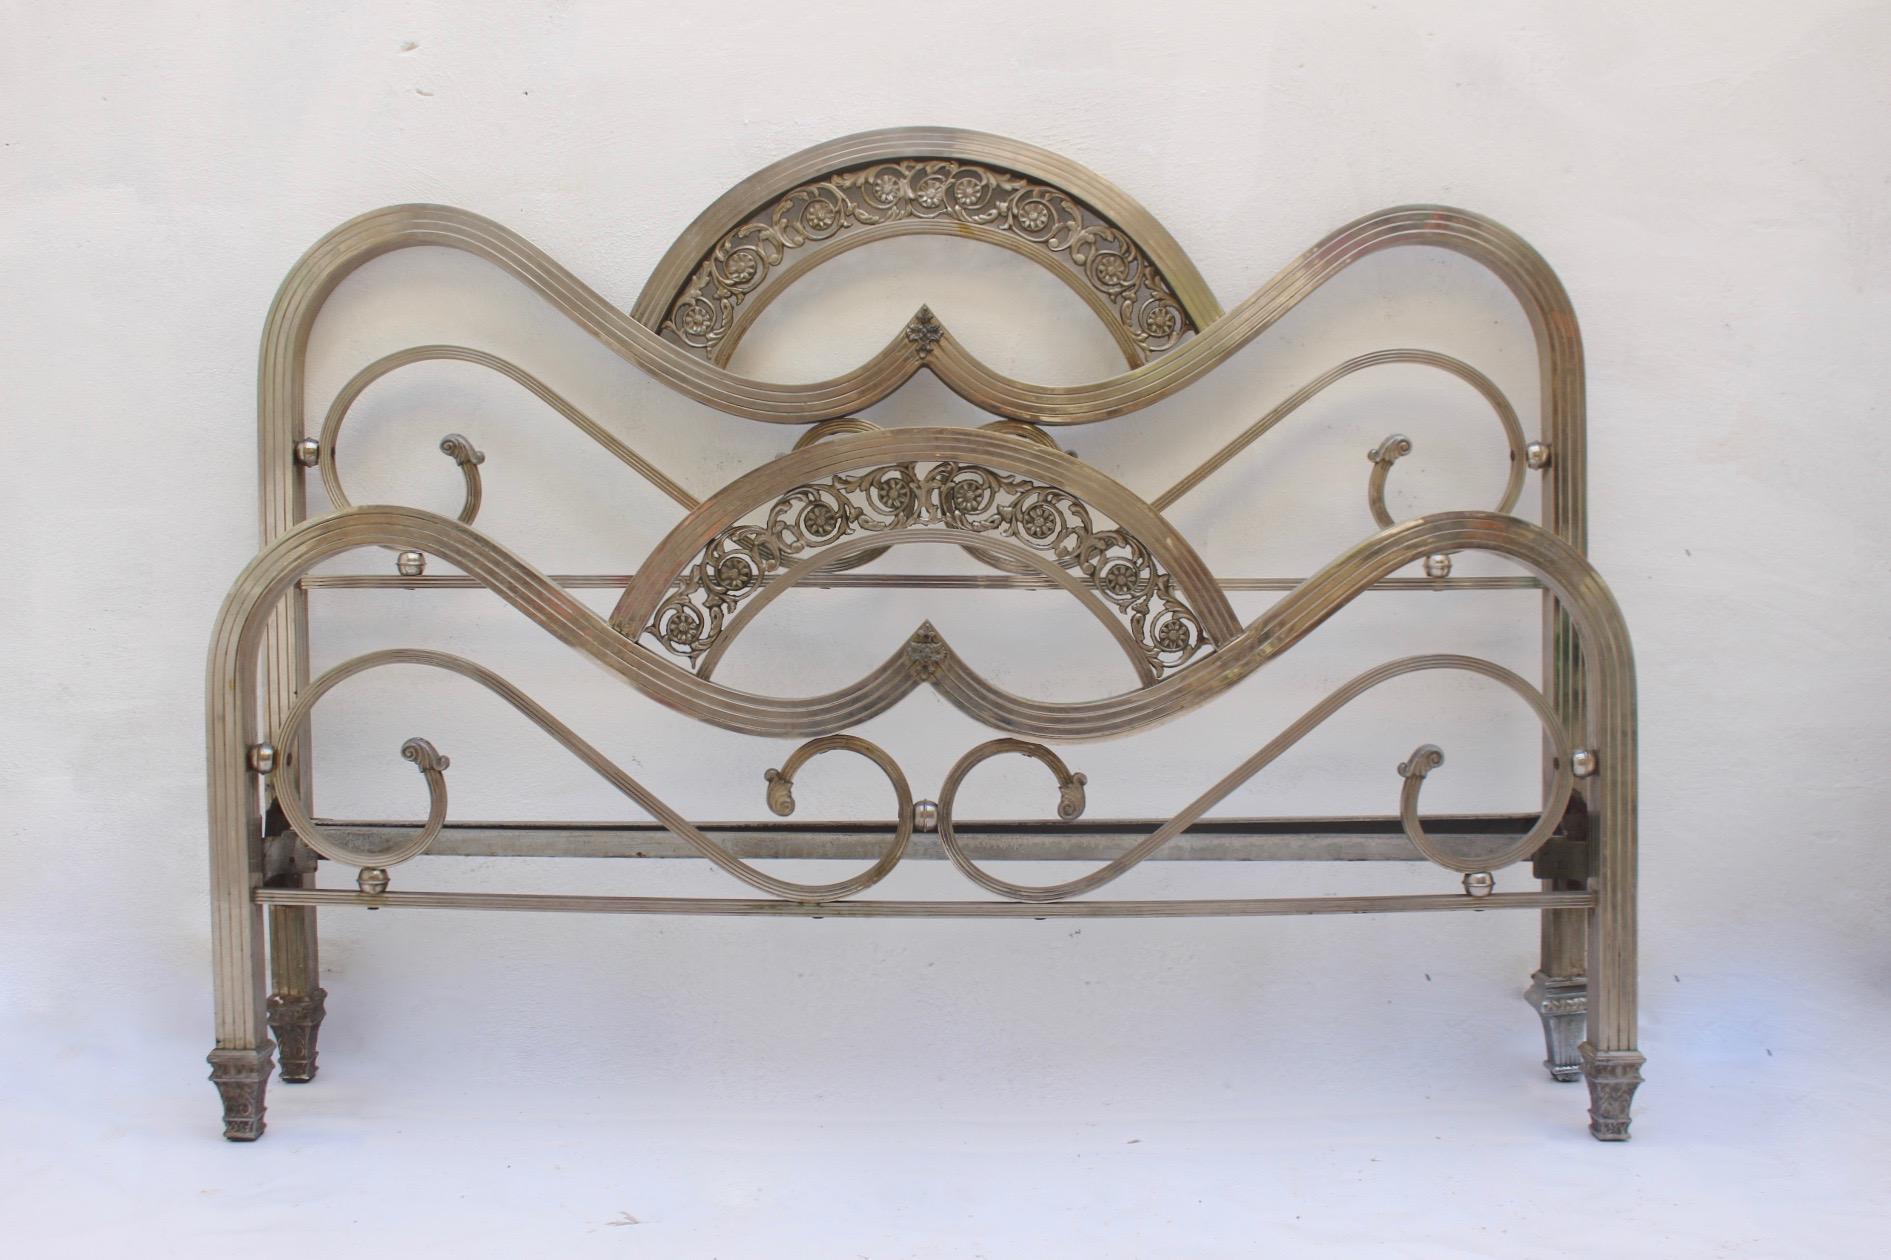 Art Deco nickeled brass double bed, headboard and foot part with bars, Spain, circa 1930s.
Fair condition.
Nickeled brass structures featuring visible wear, but without oxide signs.
They can be re-chromed under request.
Foot part Height: 69 cm.